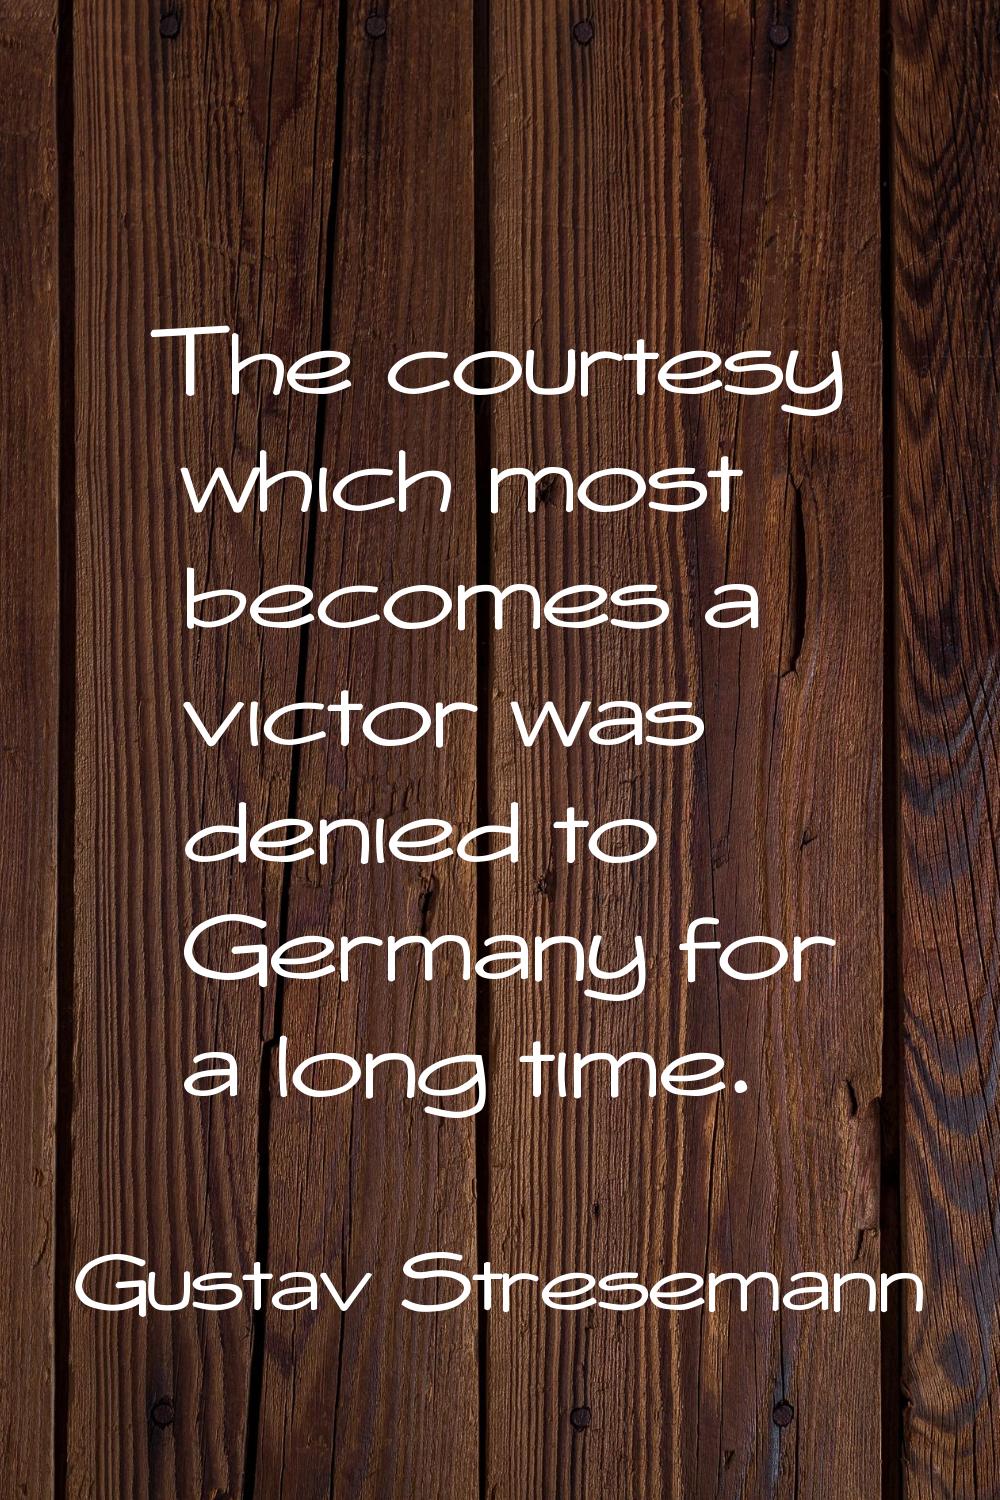 The courtesy which most becomes a victor was denied to Germany for a long time.